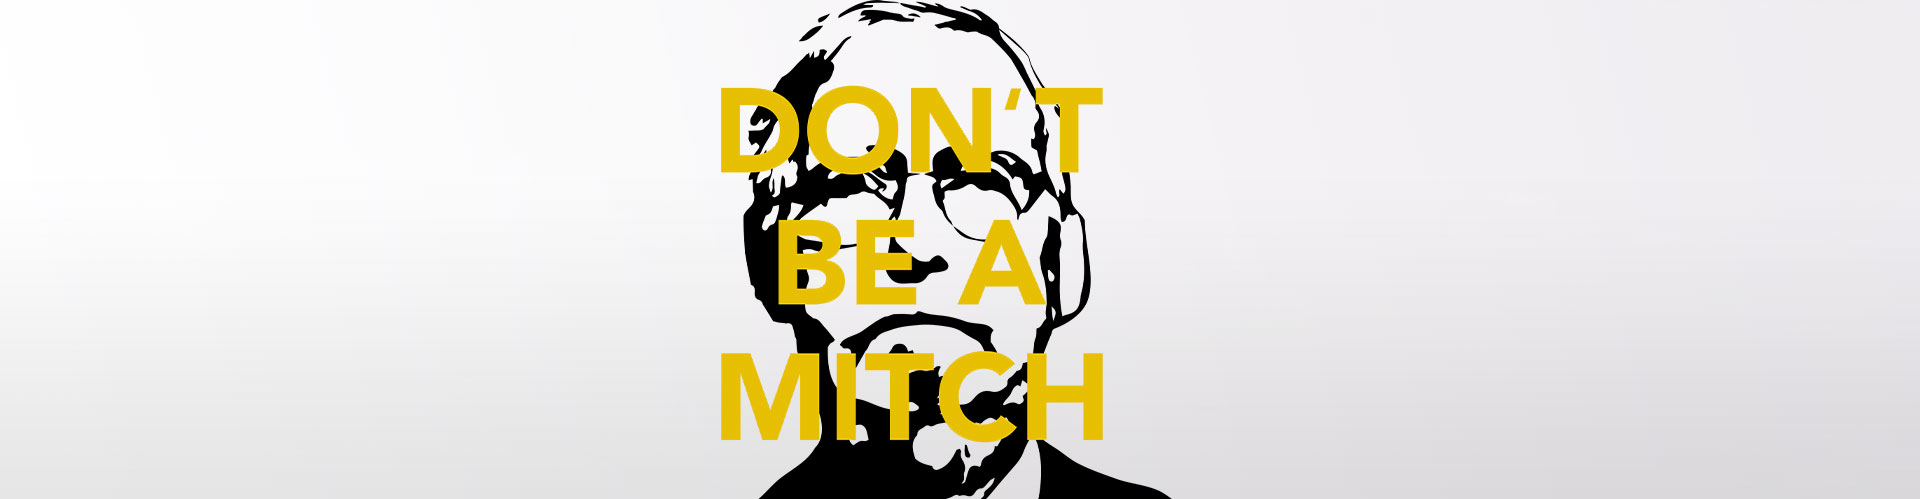 Dont-Be-A-Mitch-Banner-ActBlue-Donation-Brian-Tyler-Cohen-New